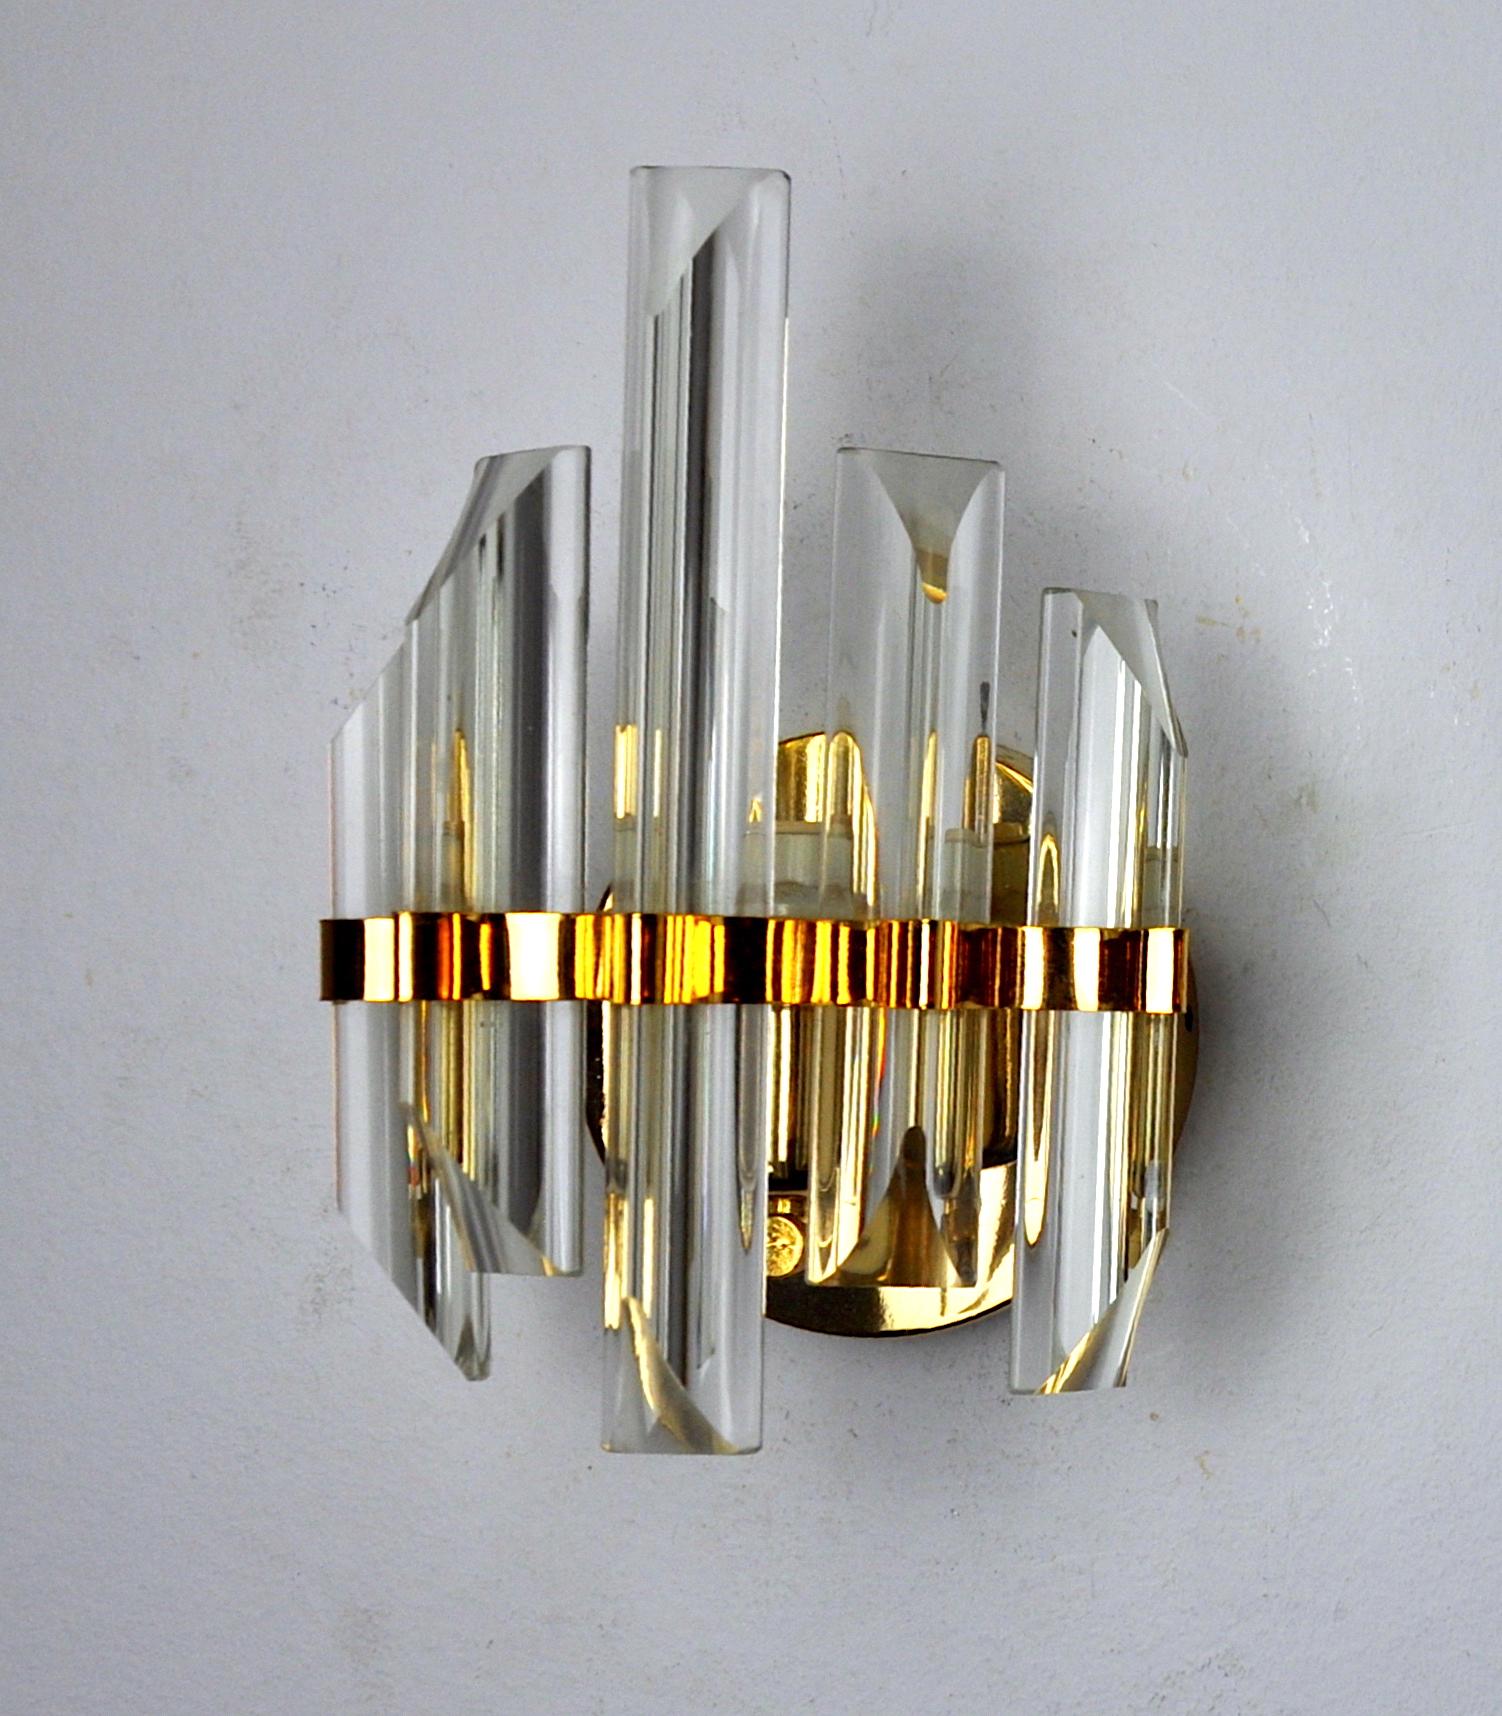 Very beautiful venini wall light from the 70s. Cut glass and silver metal structure. Unique object that will illuminate and bring a real design touch to your interior. Electricity checked, mark of time relating to the age of the object. Easy